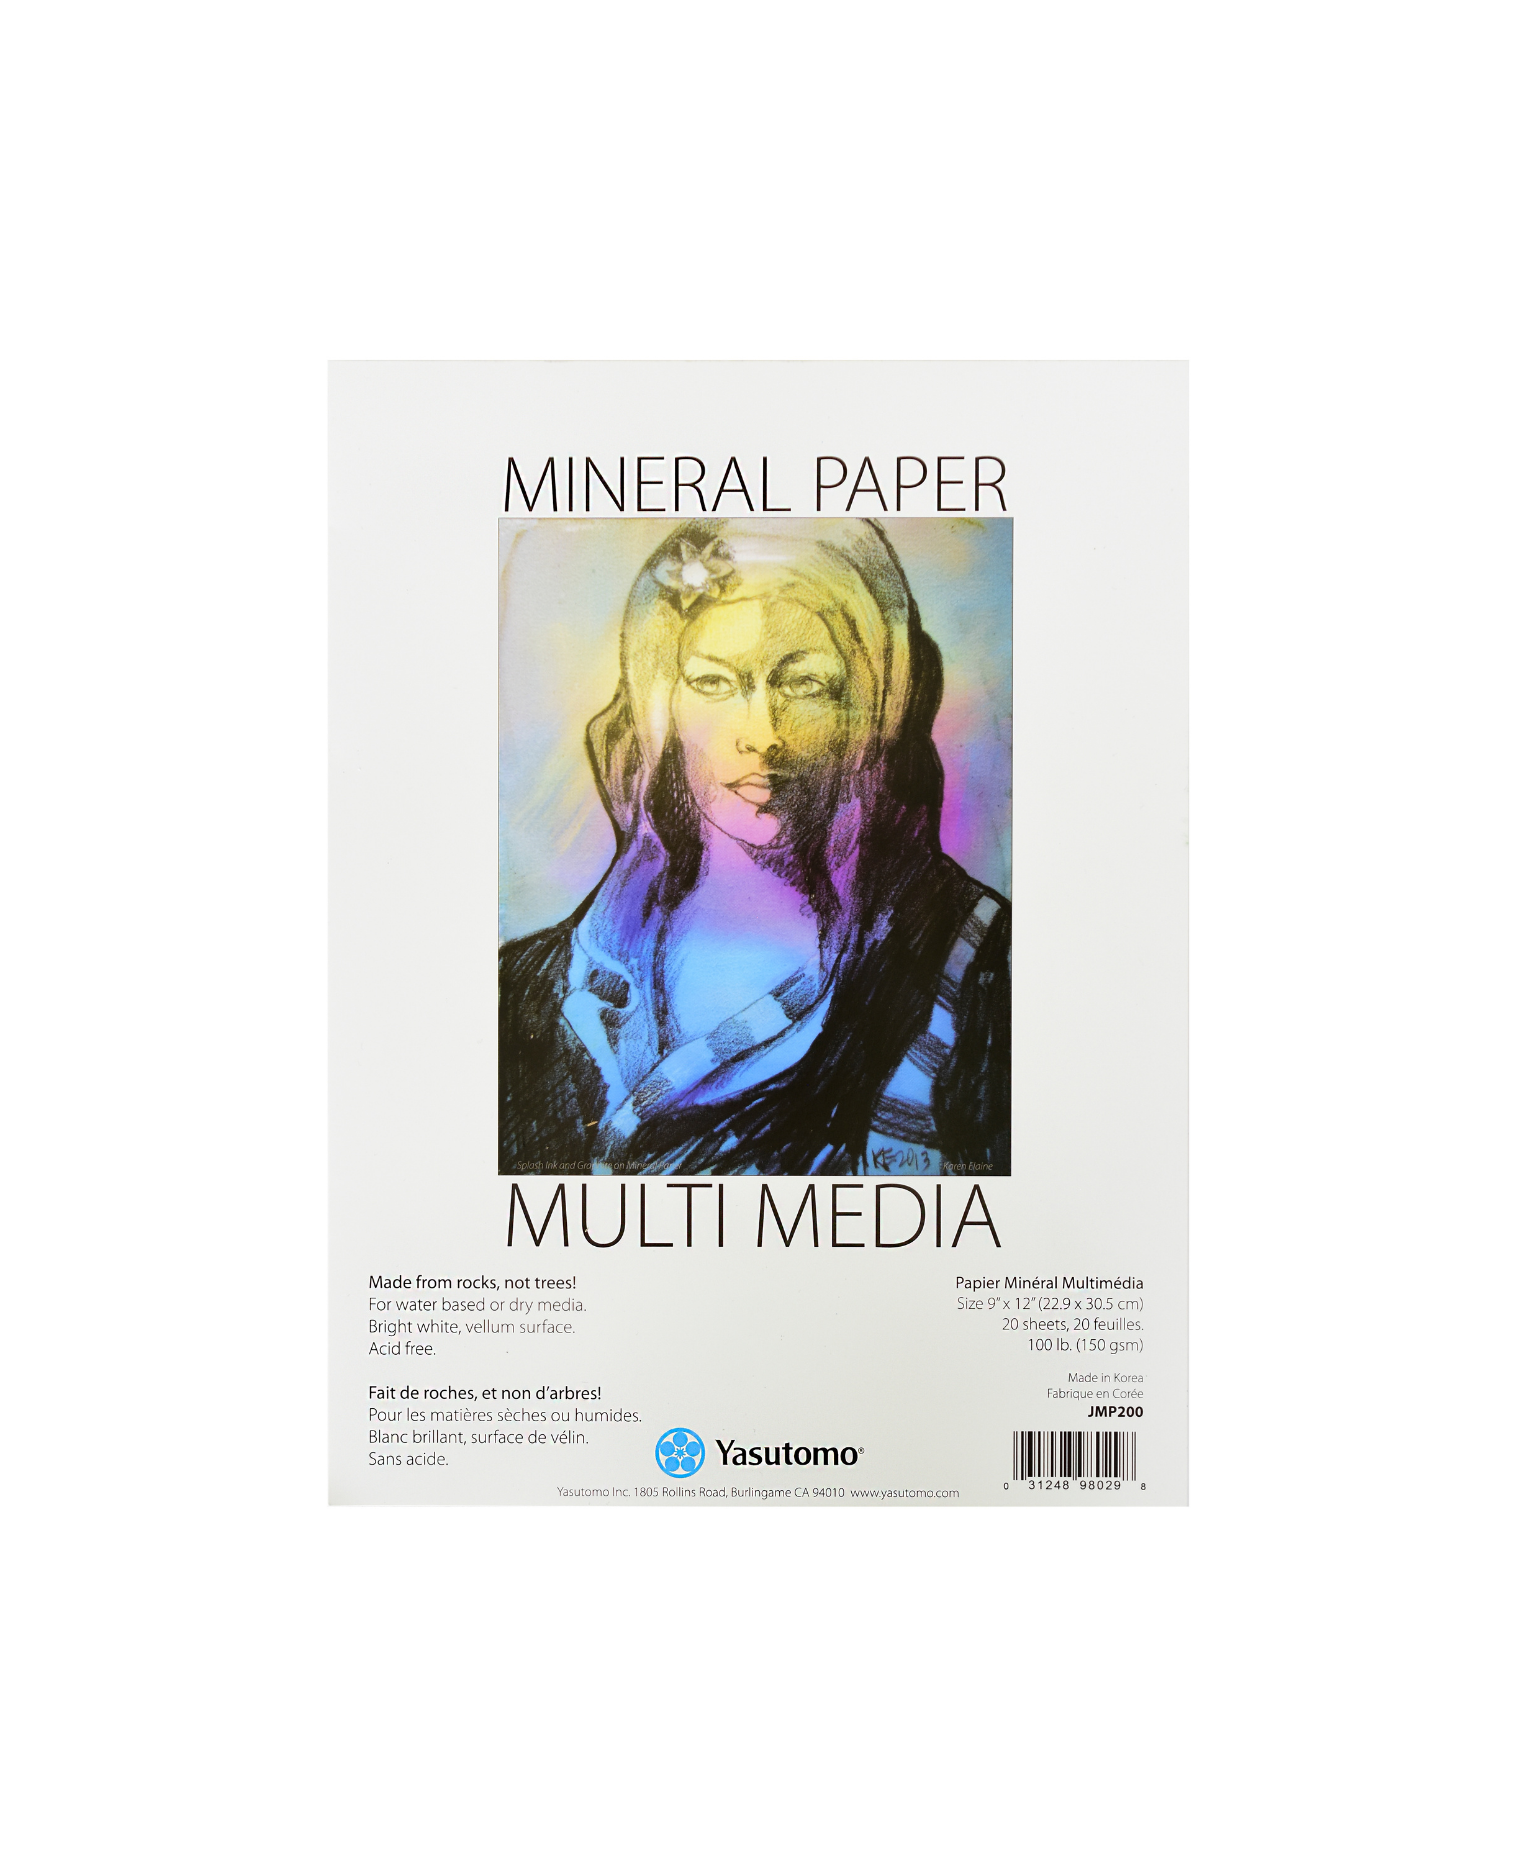 Paper and Media, Ink & Paper, Products